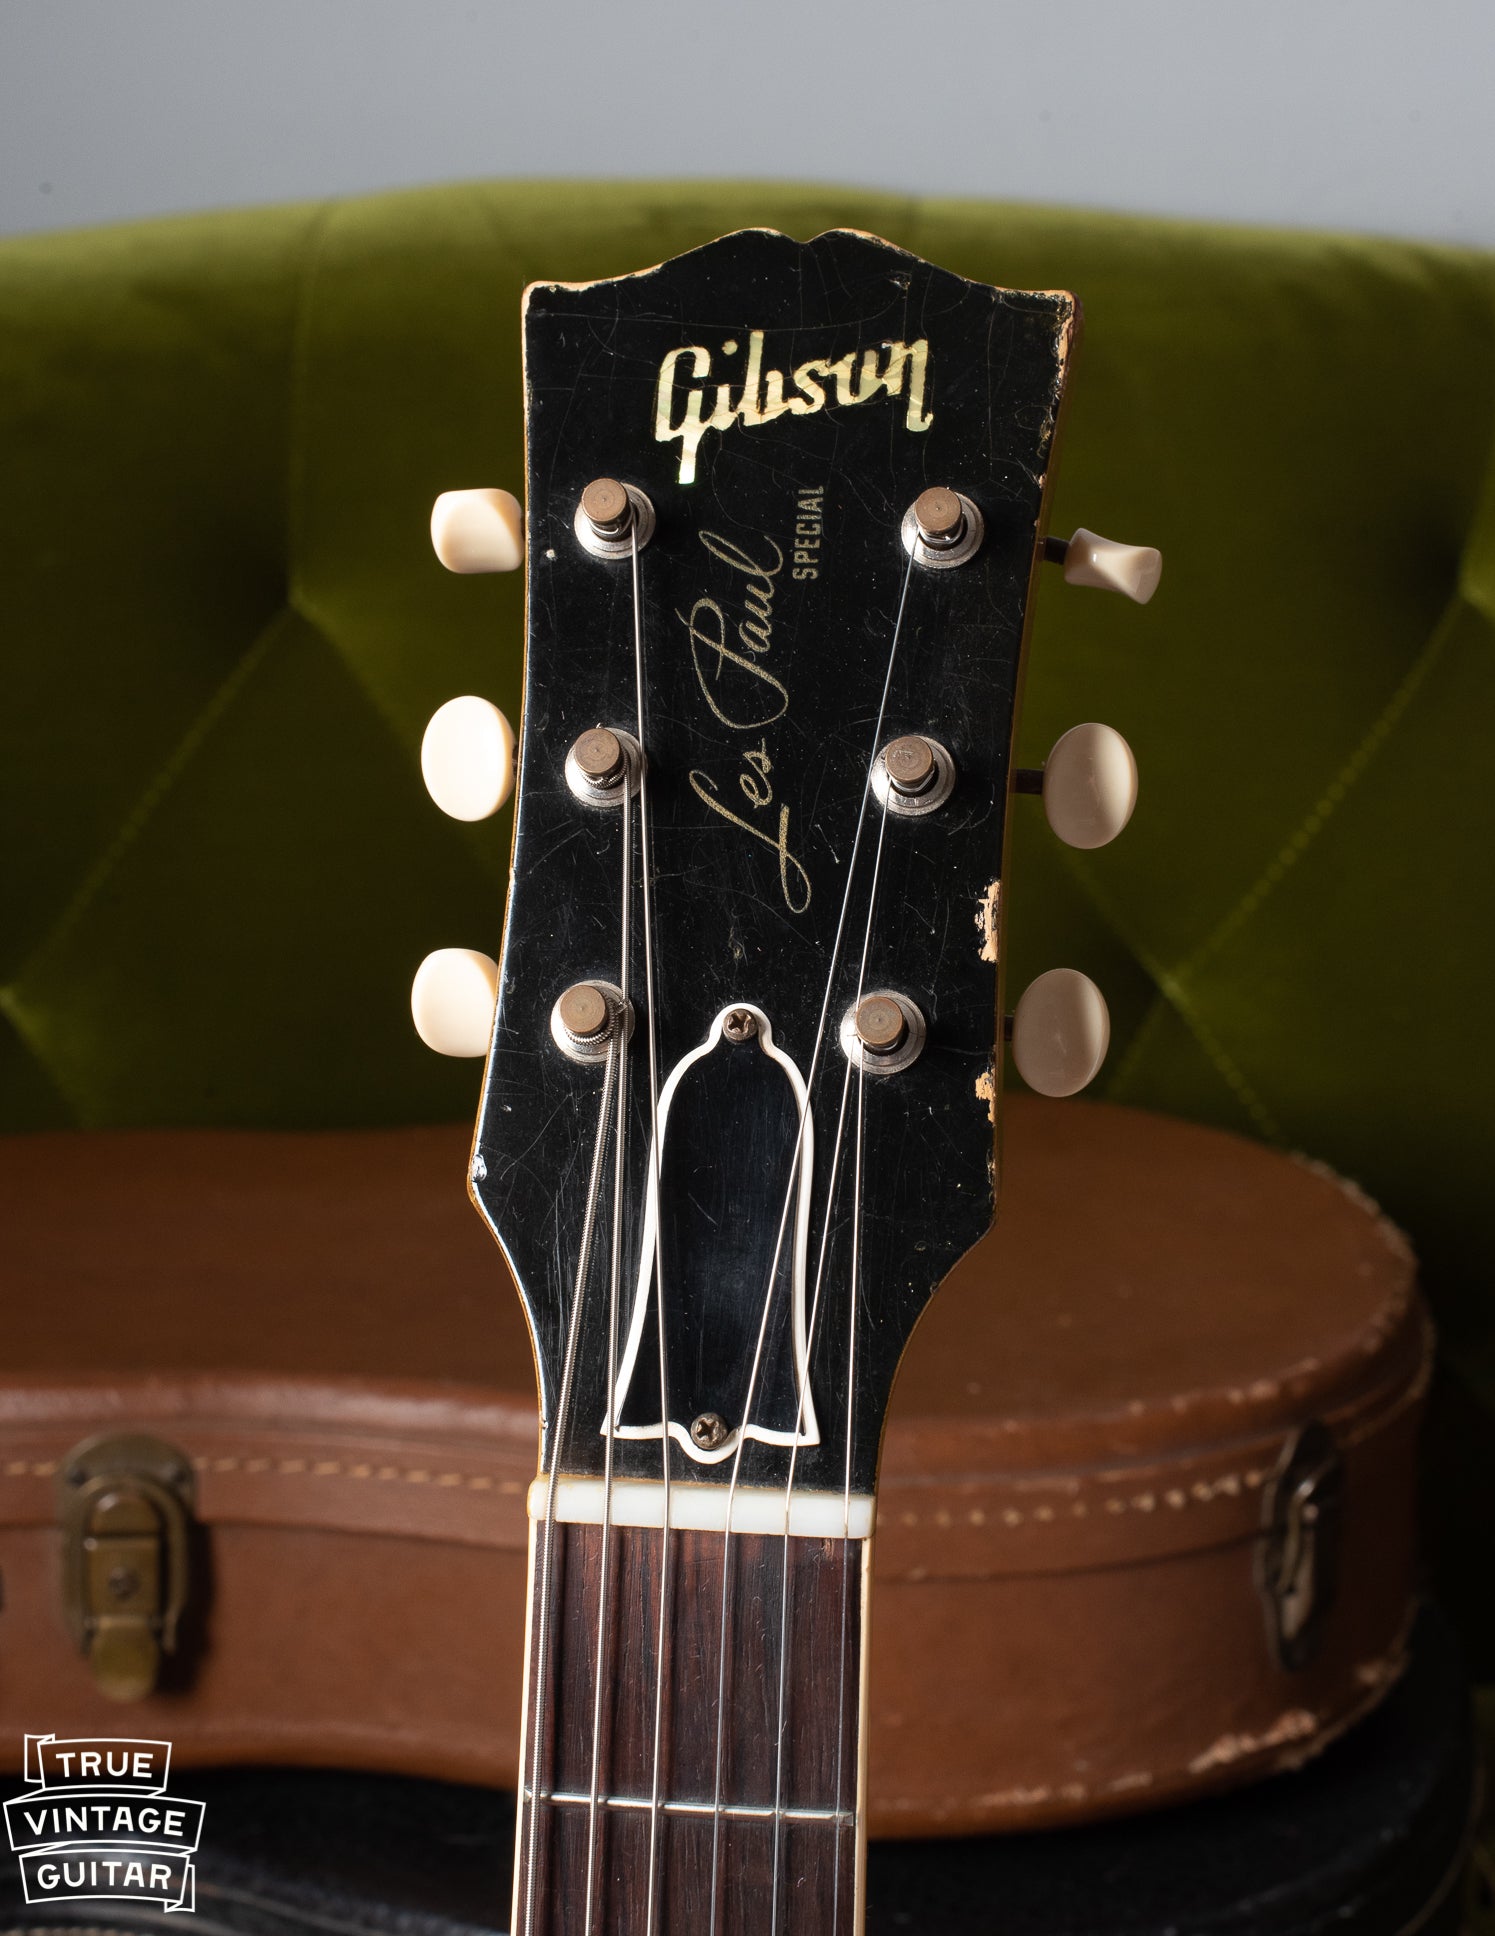 1950s Gibson Les Paul headstock and neck